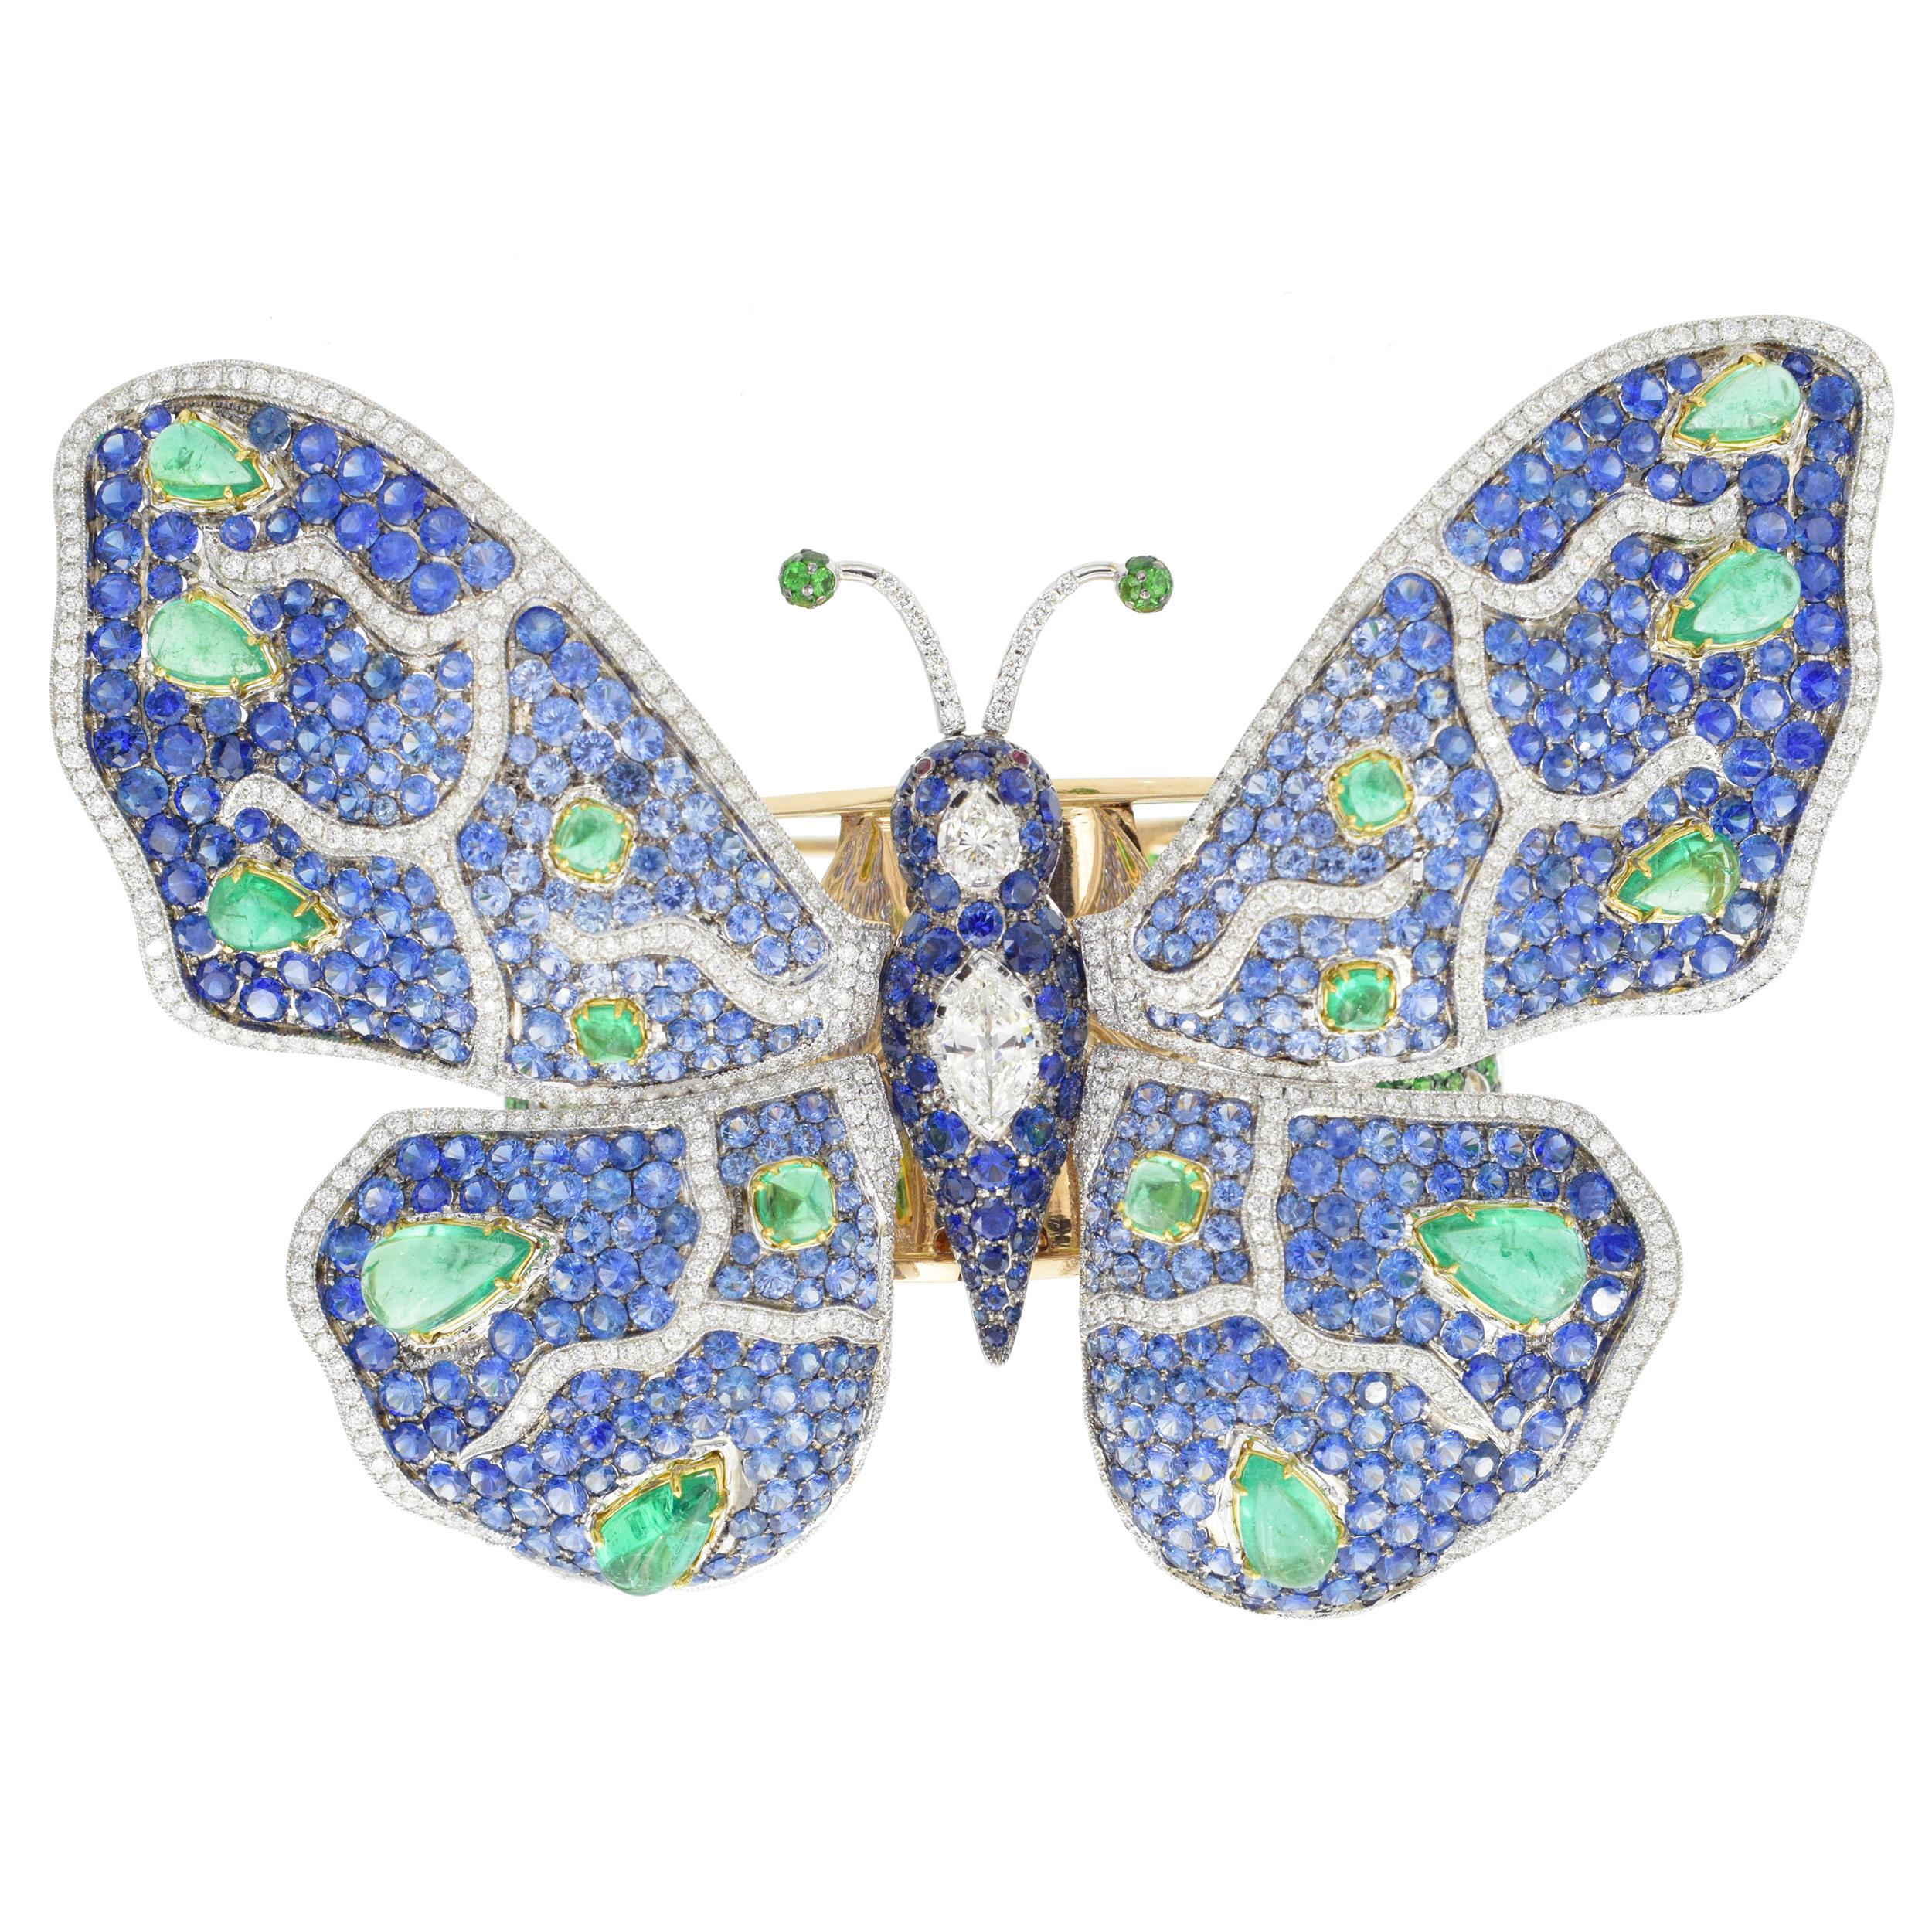 De Grisogono diamond and gemstone butterfly bangle in 18k yellow gold. The butterfly is set with 1.01ct pear marquise cut diamond and 0.35ct pear shape diamond. Encrusted with round cut blue sapphires with total weight of 52.26ct, cabochon cut